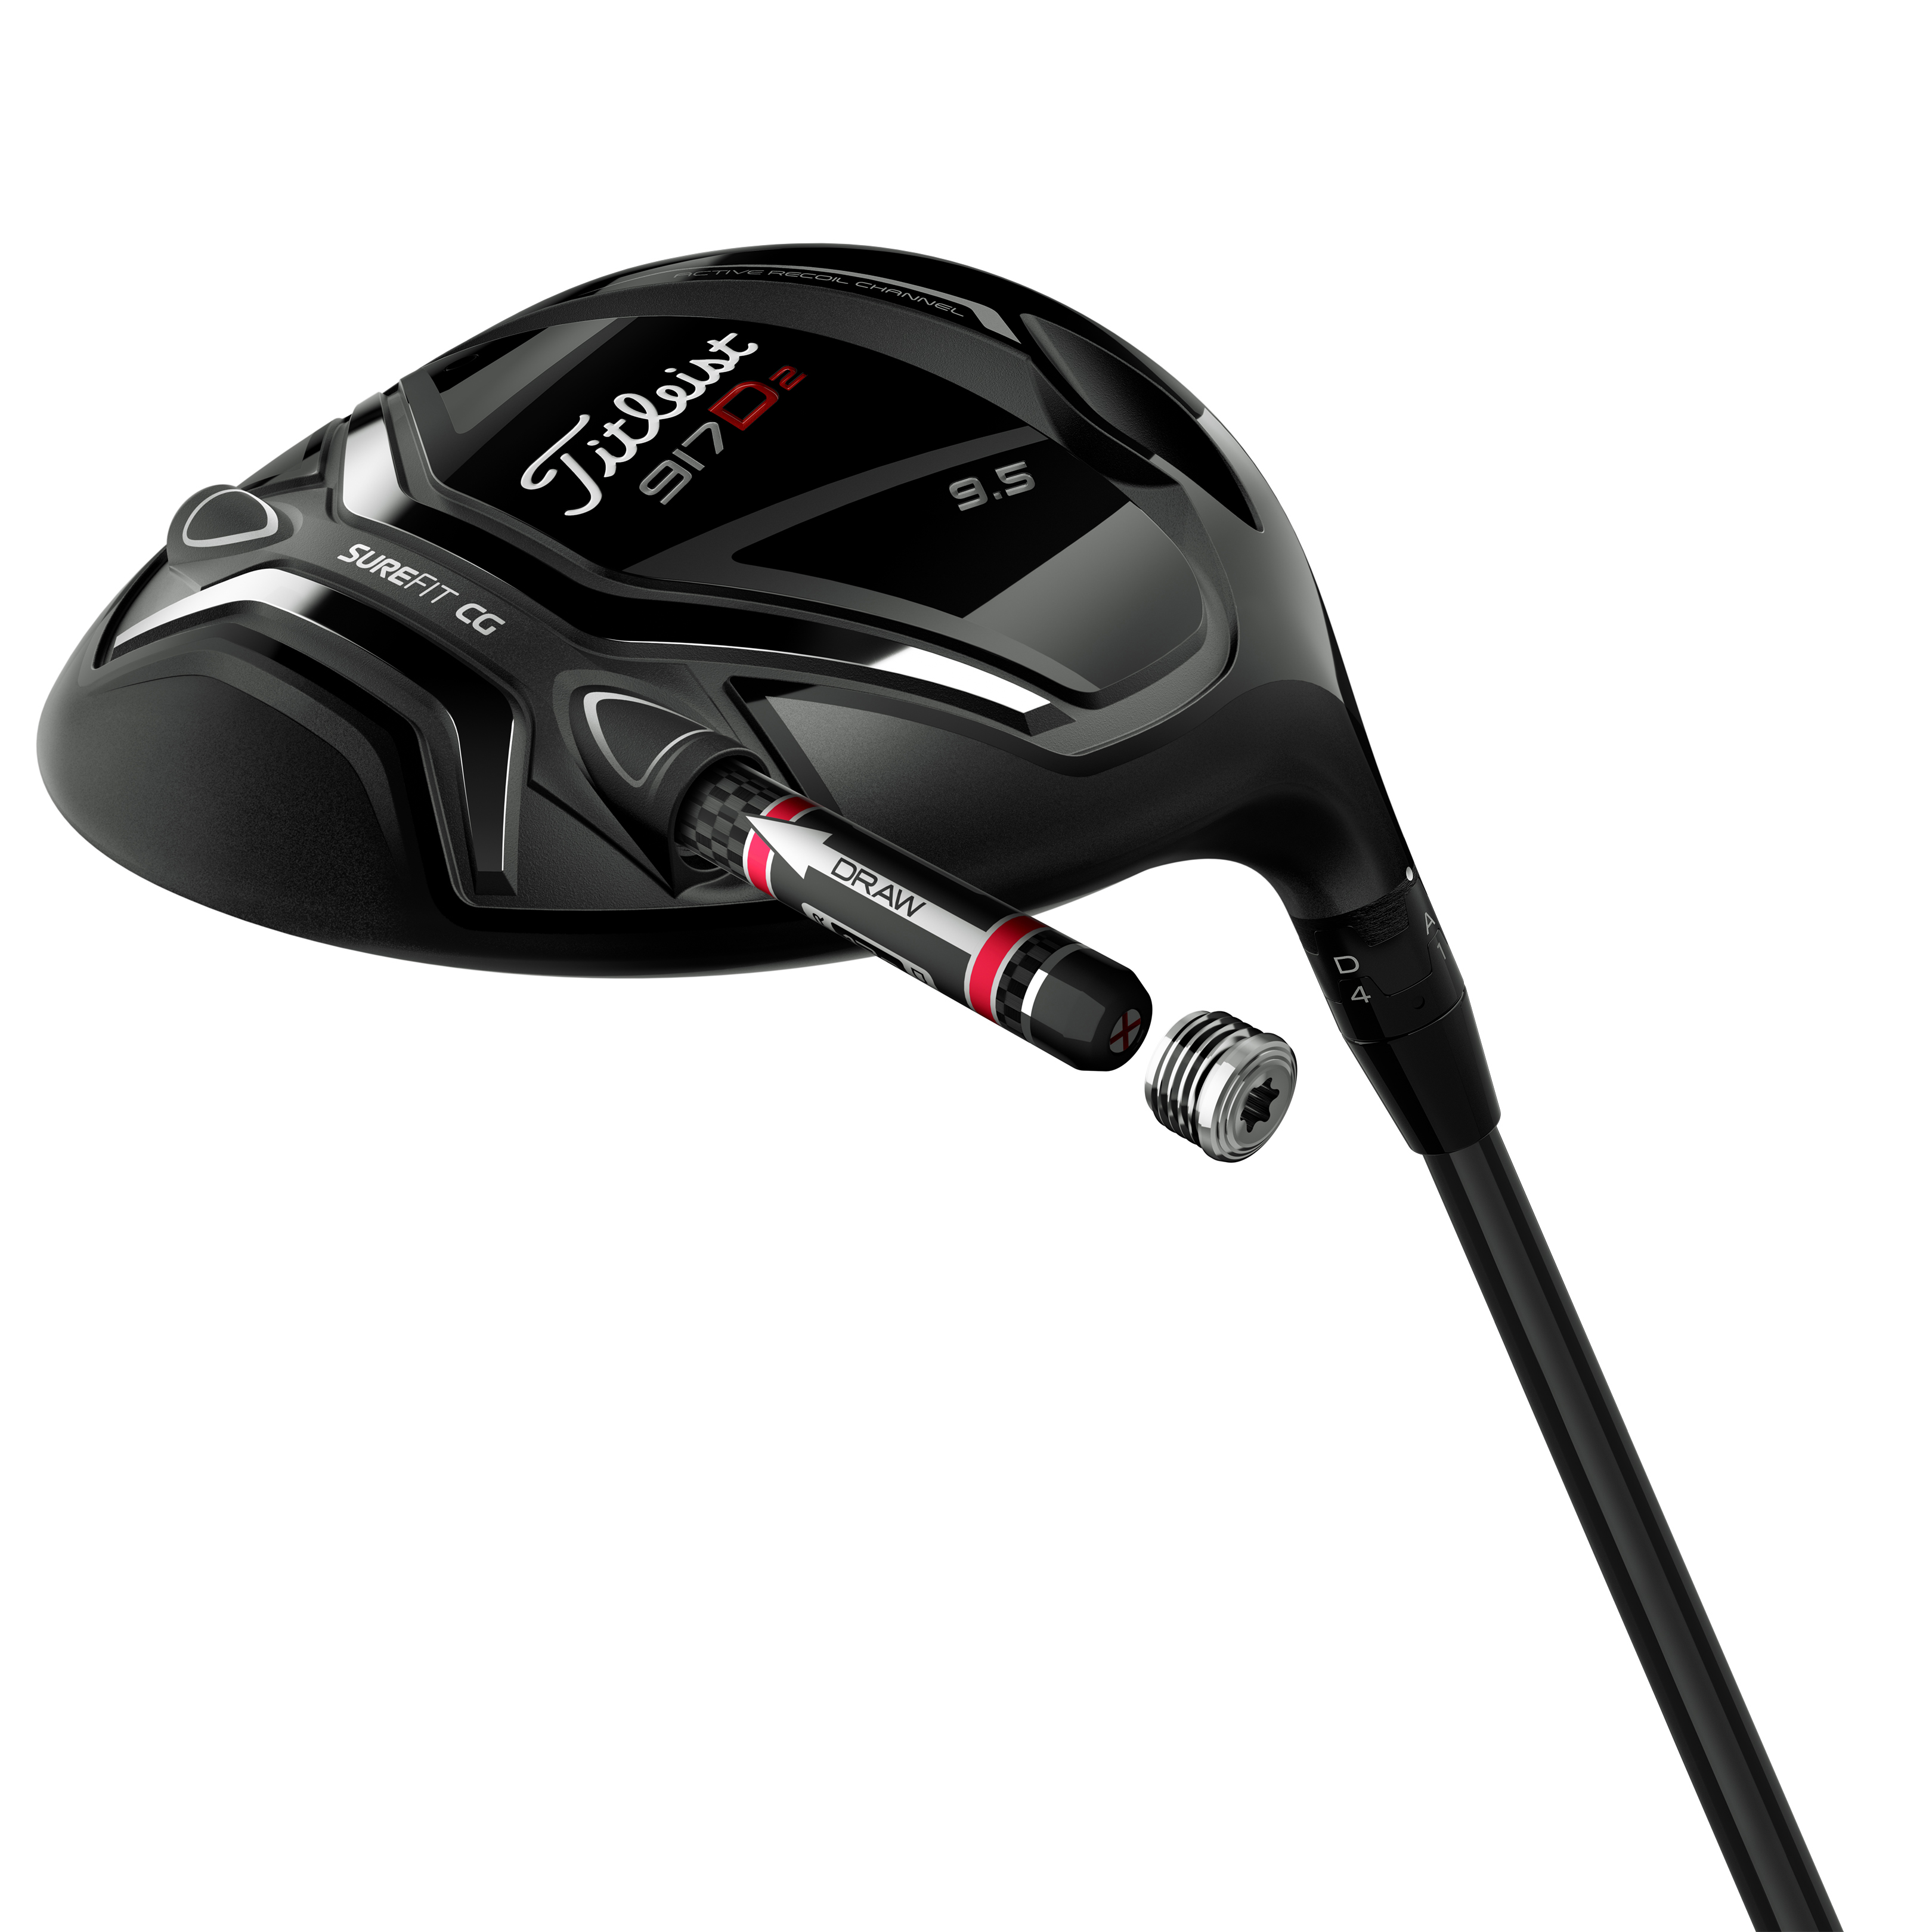 Titleist 917 D2 Driver Review: Music to our ears